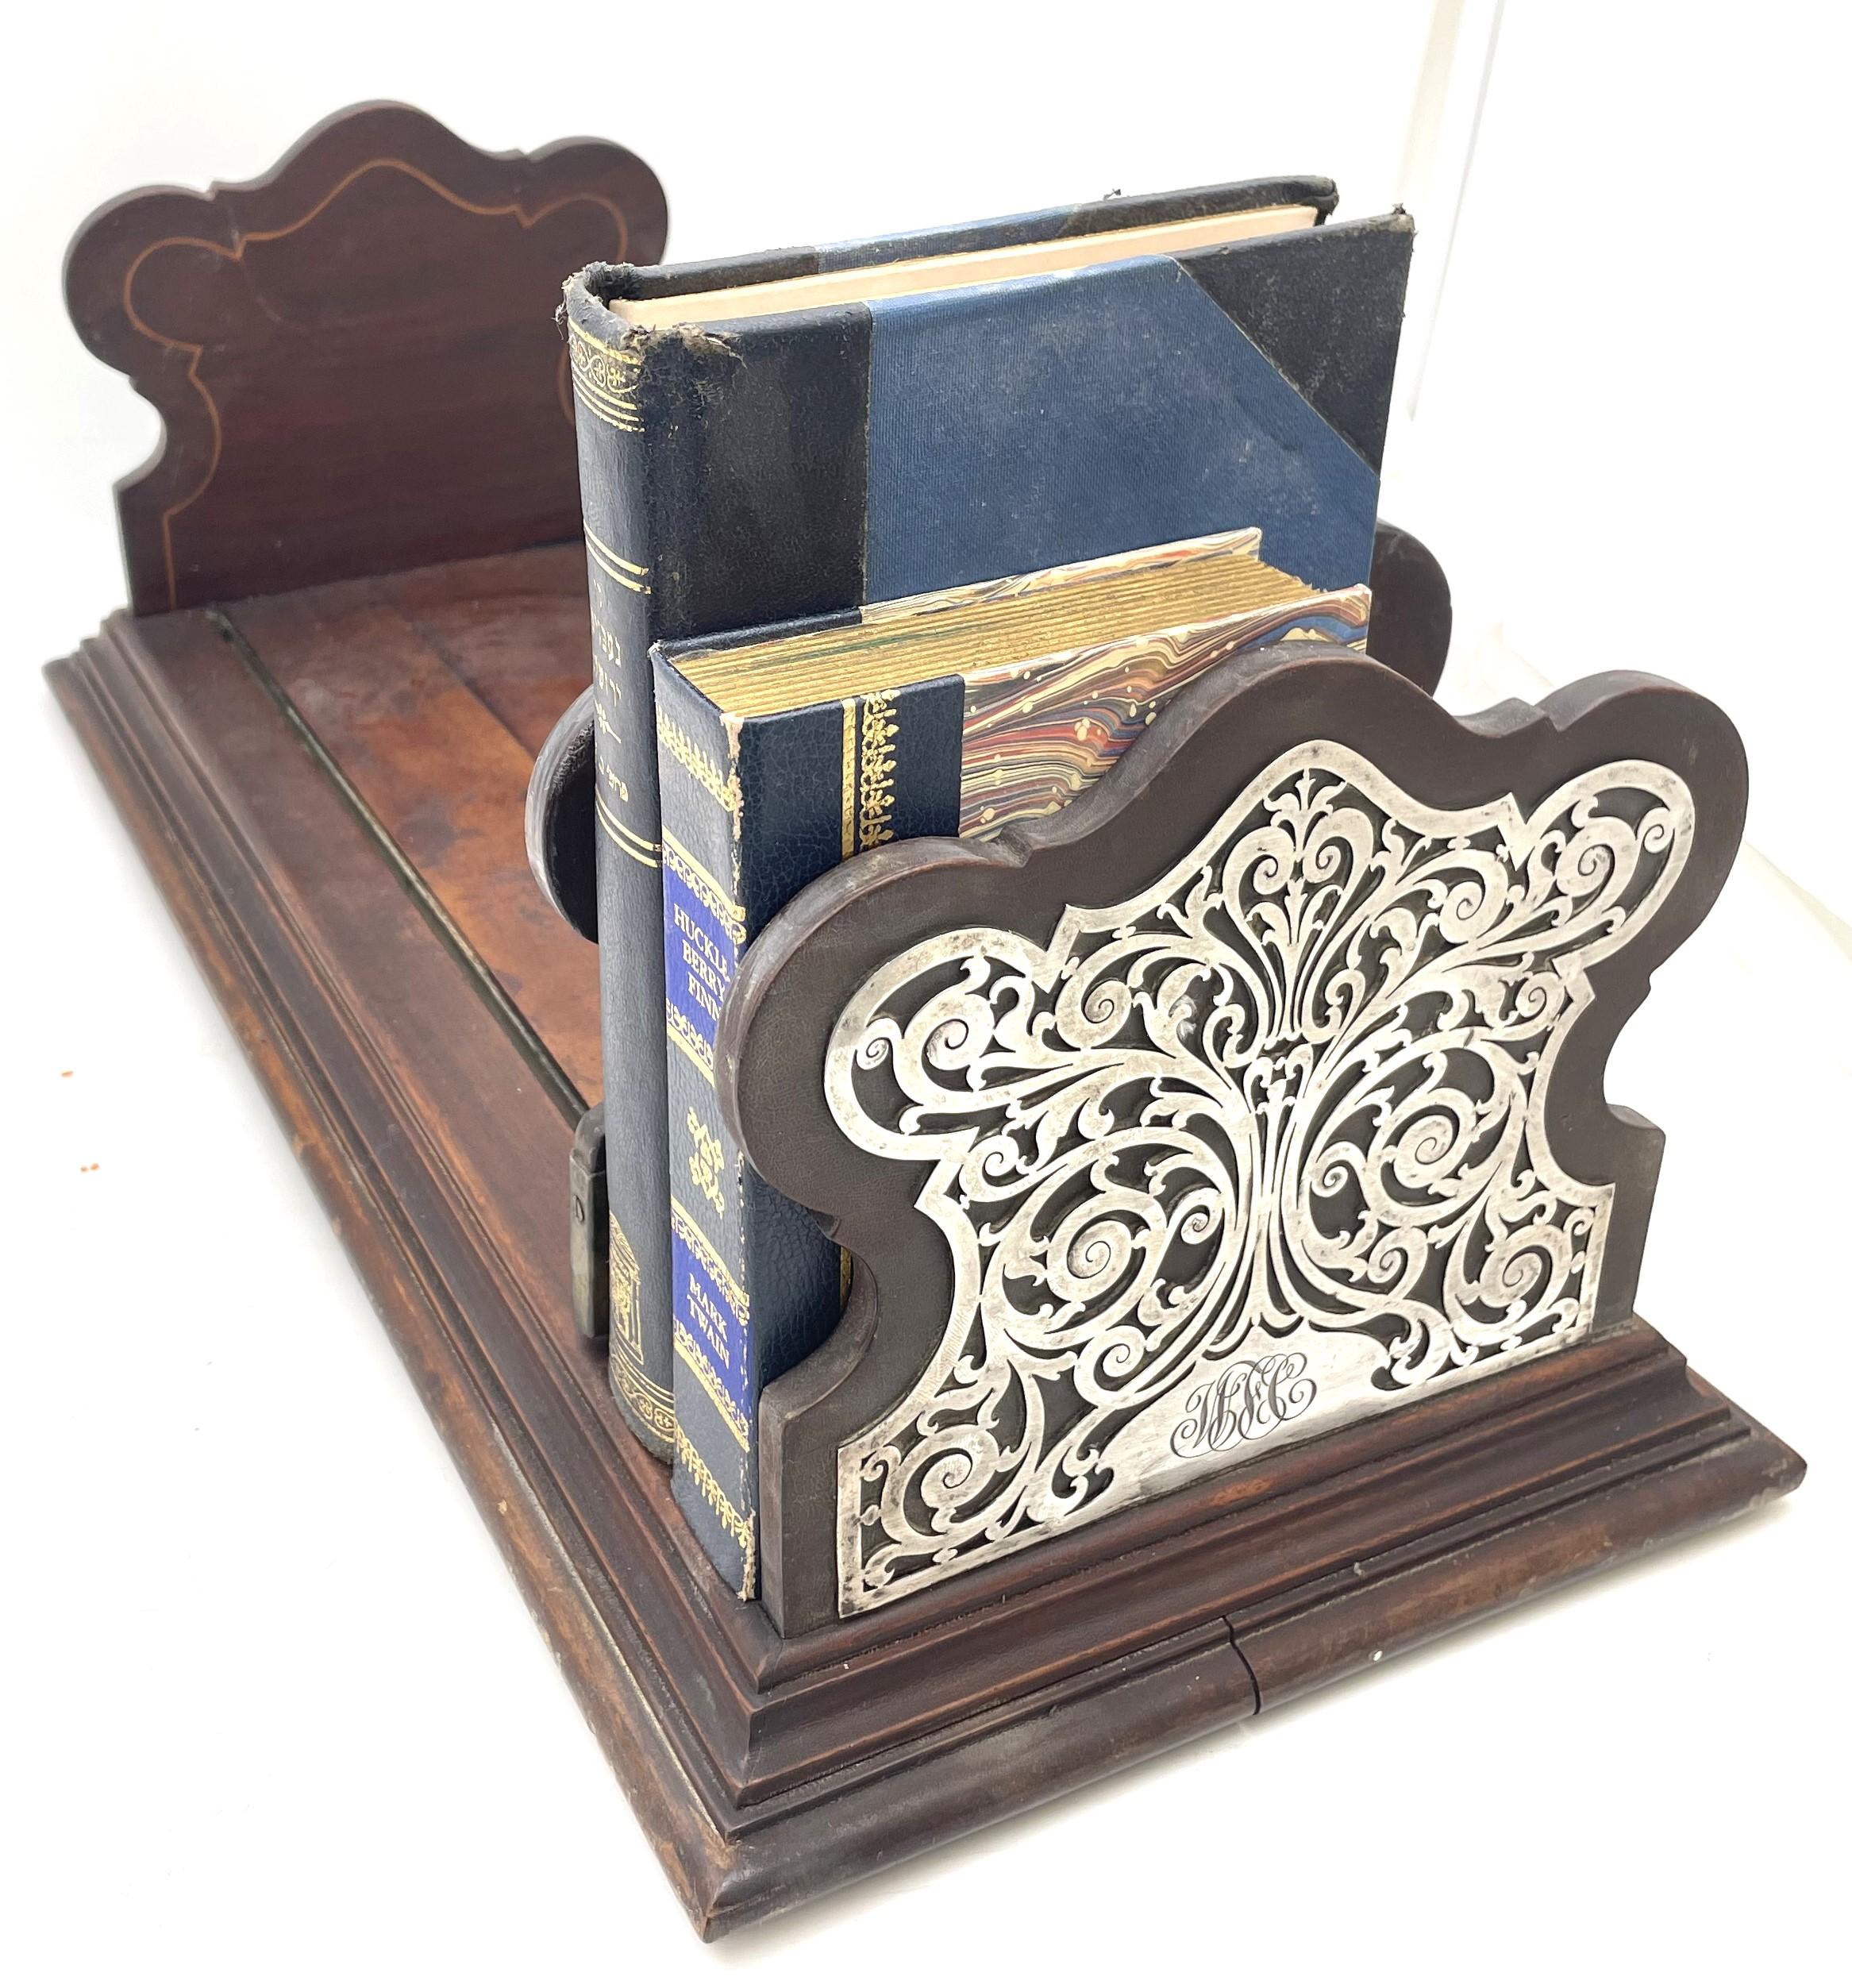 Rare Black, Starr & Frost sterling silver and mahogany wood bookshelf or holder, with an adjustable divider, presumably from the late 19th or early 20th century, beautifully adorned with curvilinear sterling silver motifs on either end of the piece.